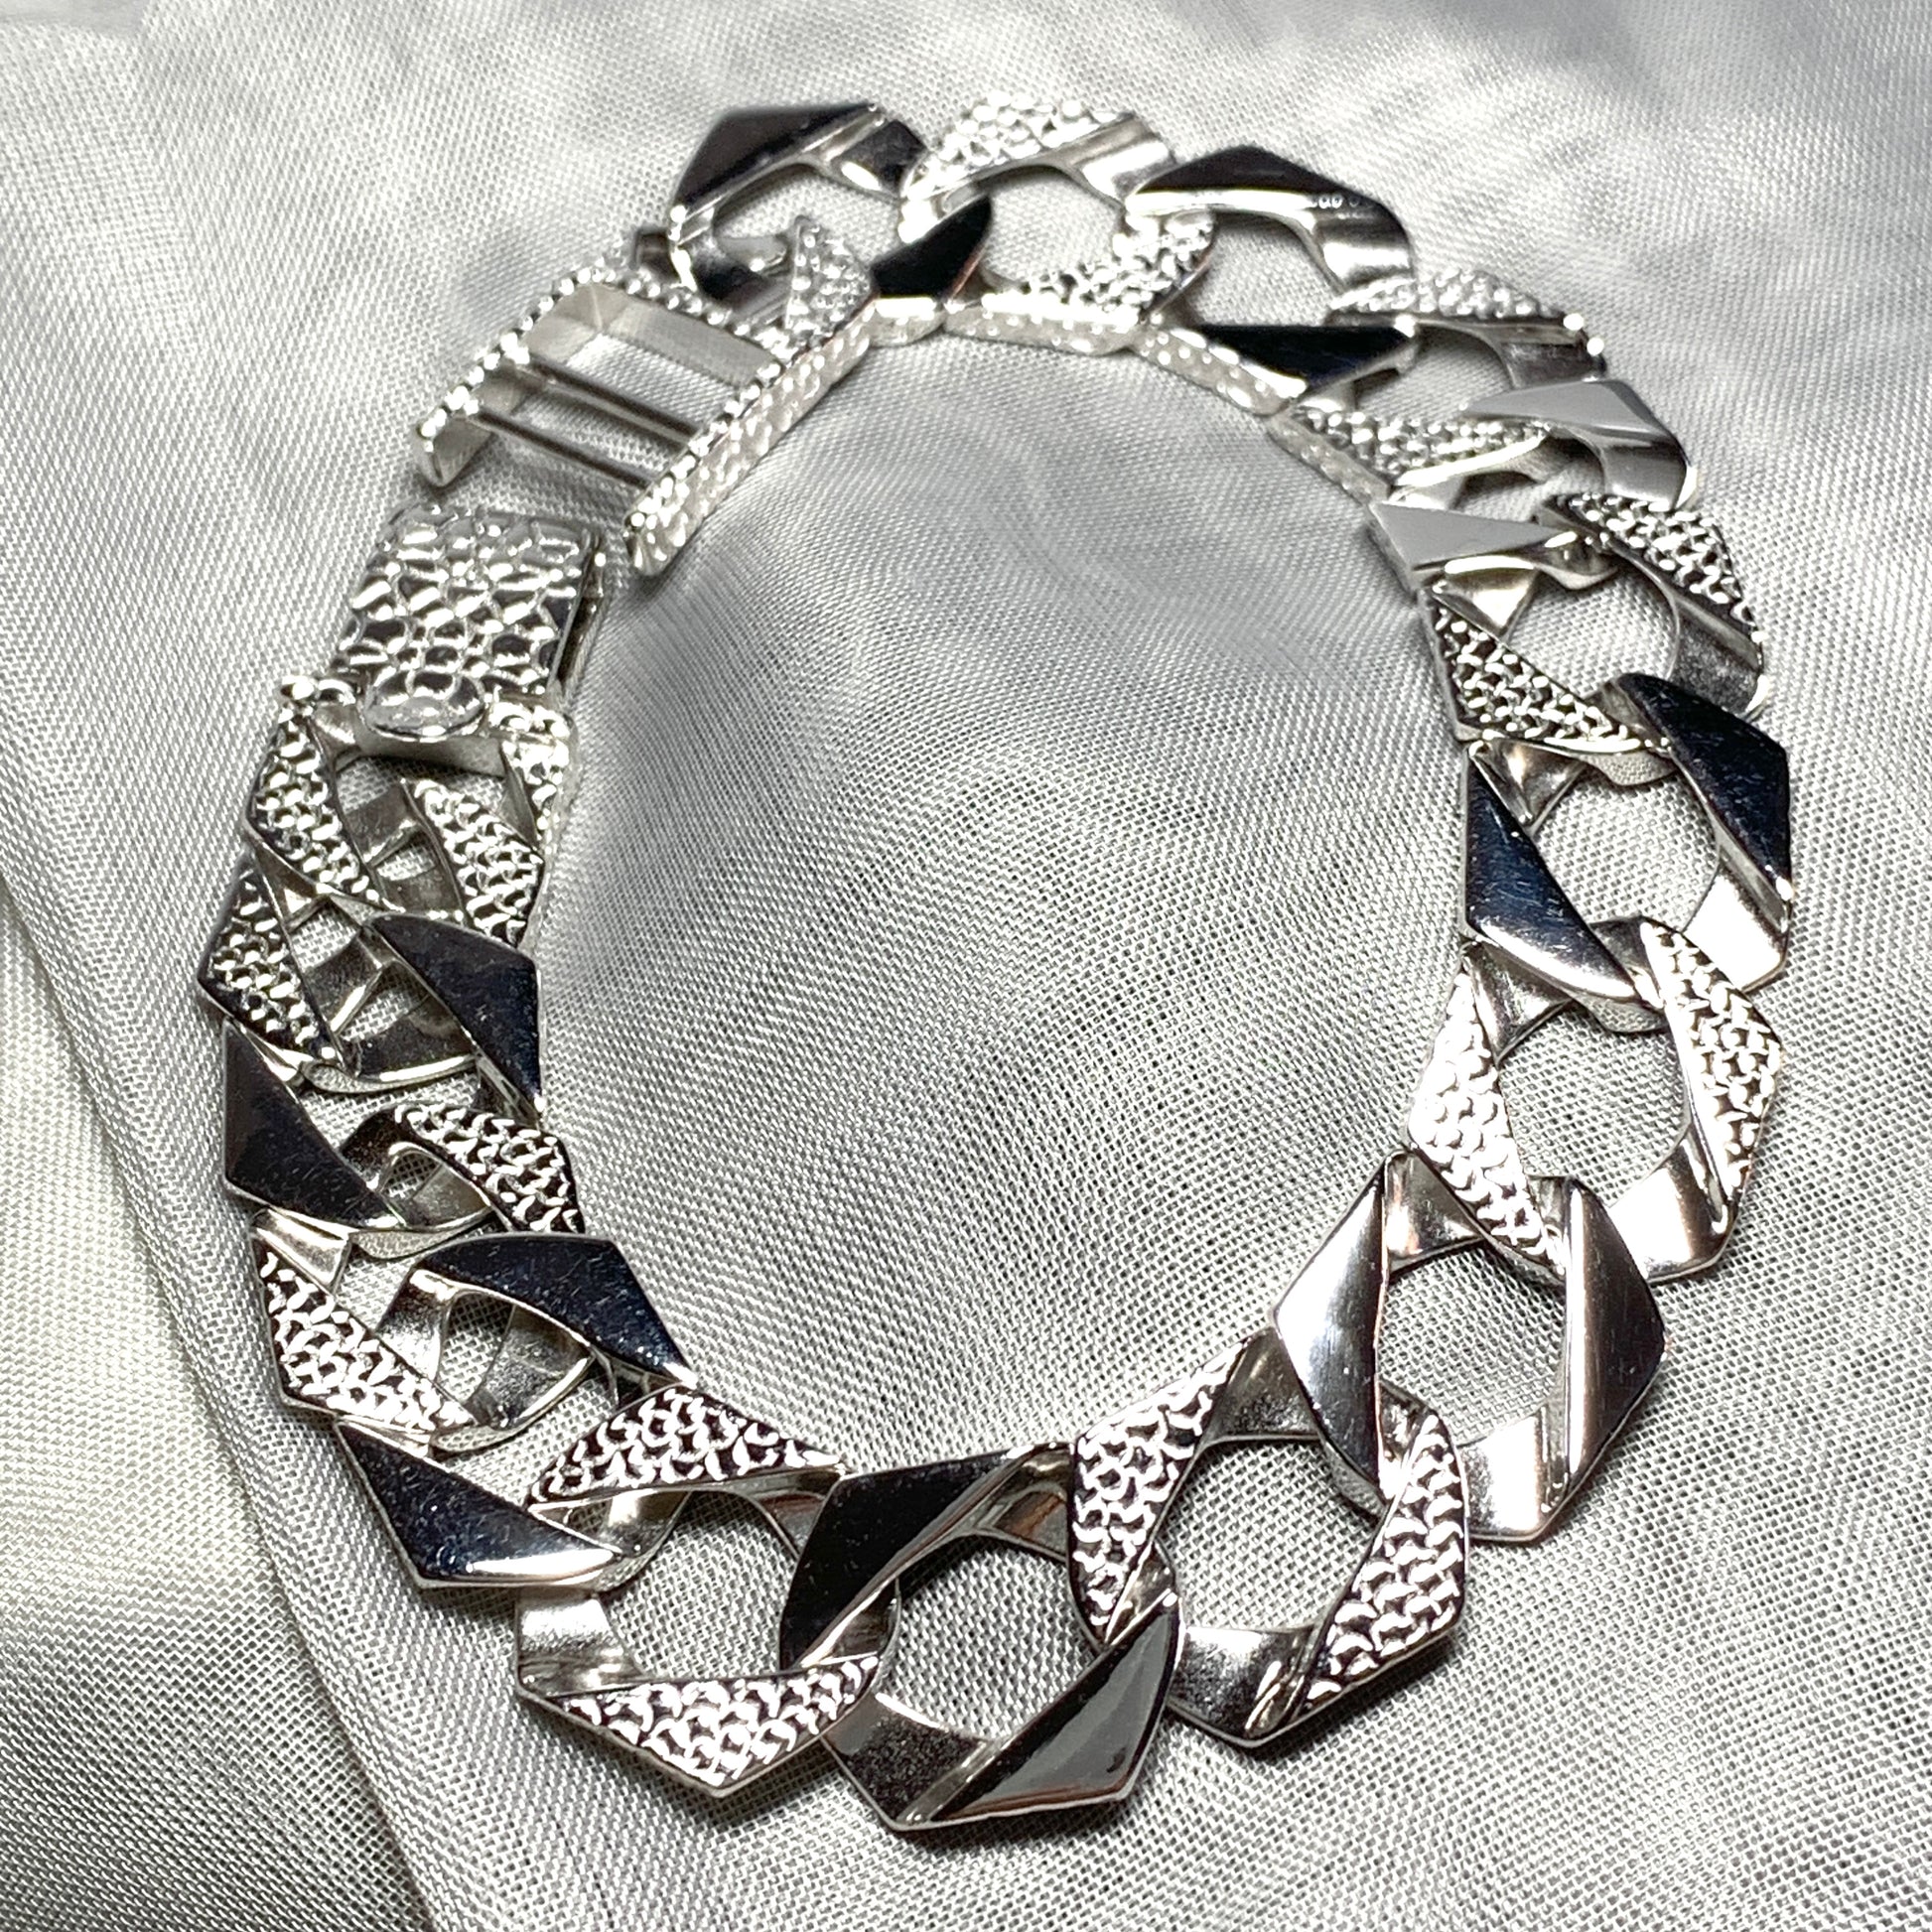 Men's solid 41g sterling silver extra heavyweight 9 inch half patterned bark effect curb bracelet